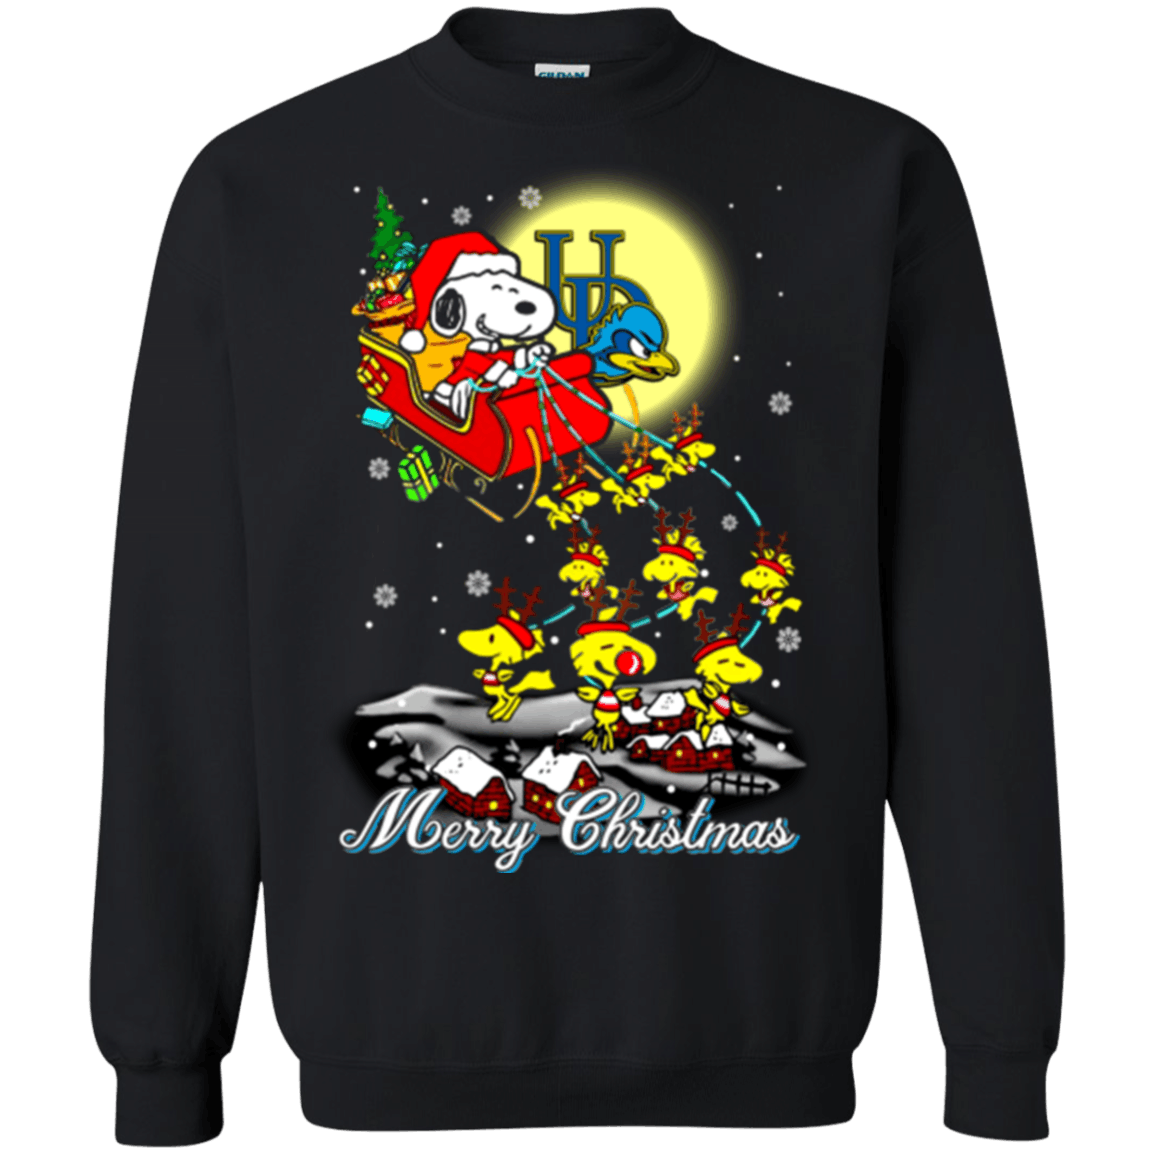 Amazing Delaware Fightin Blue Hens Snoopy Ugly Christmas Sweaters Santa Claus With Sleigh Sweatshirts